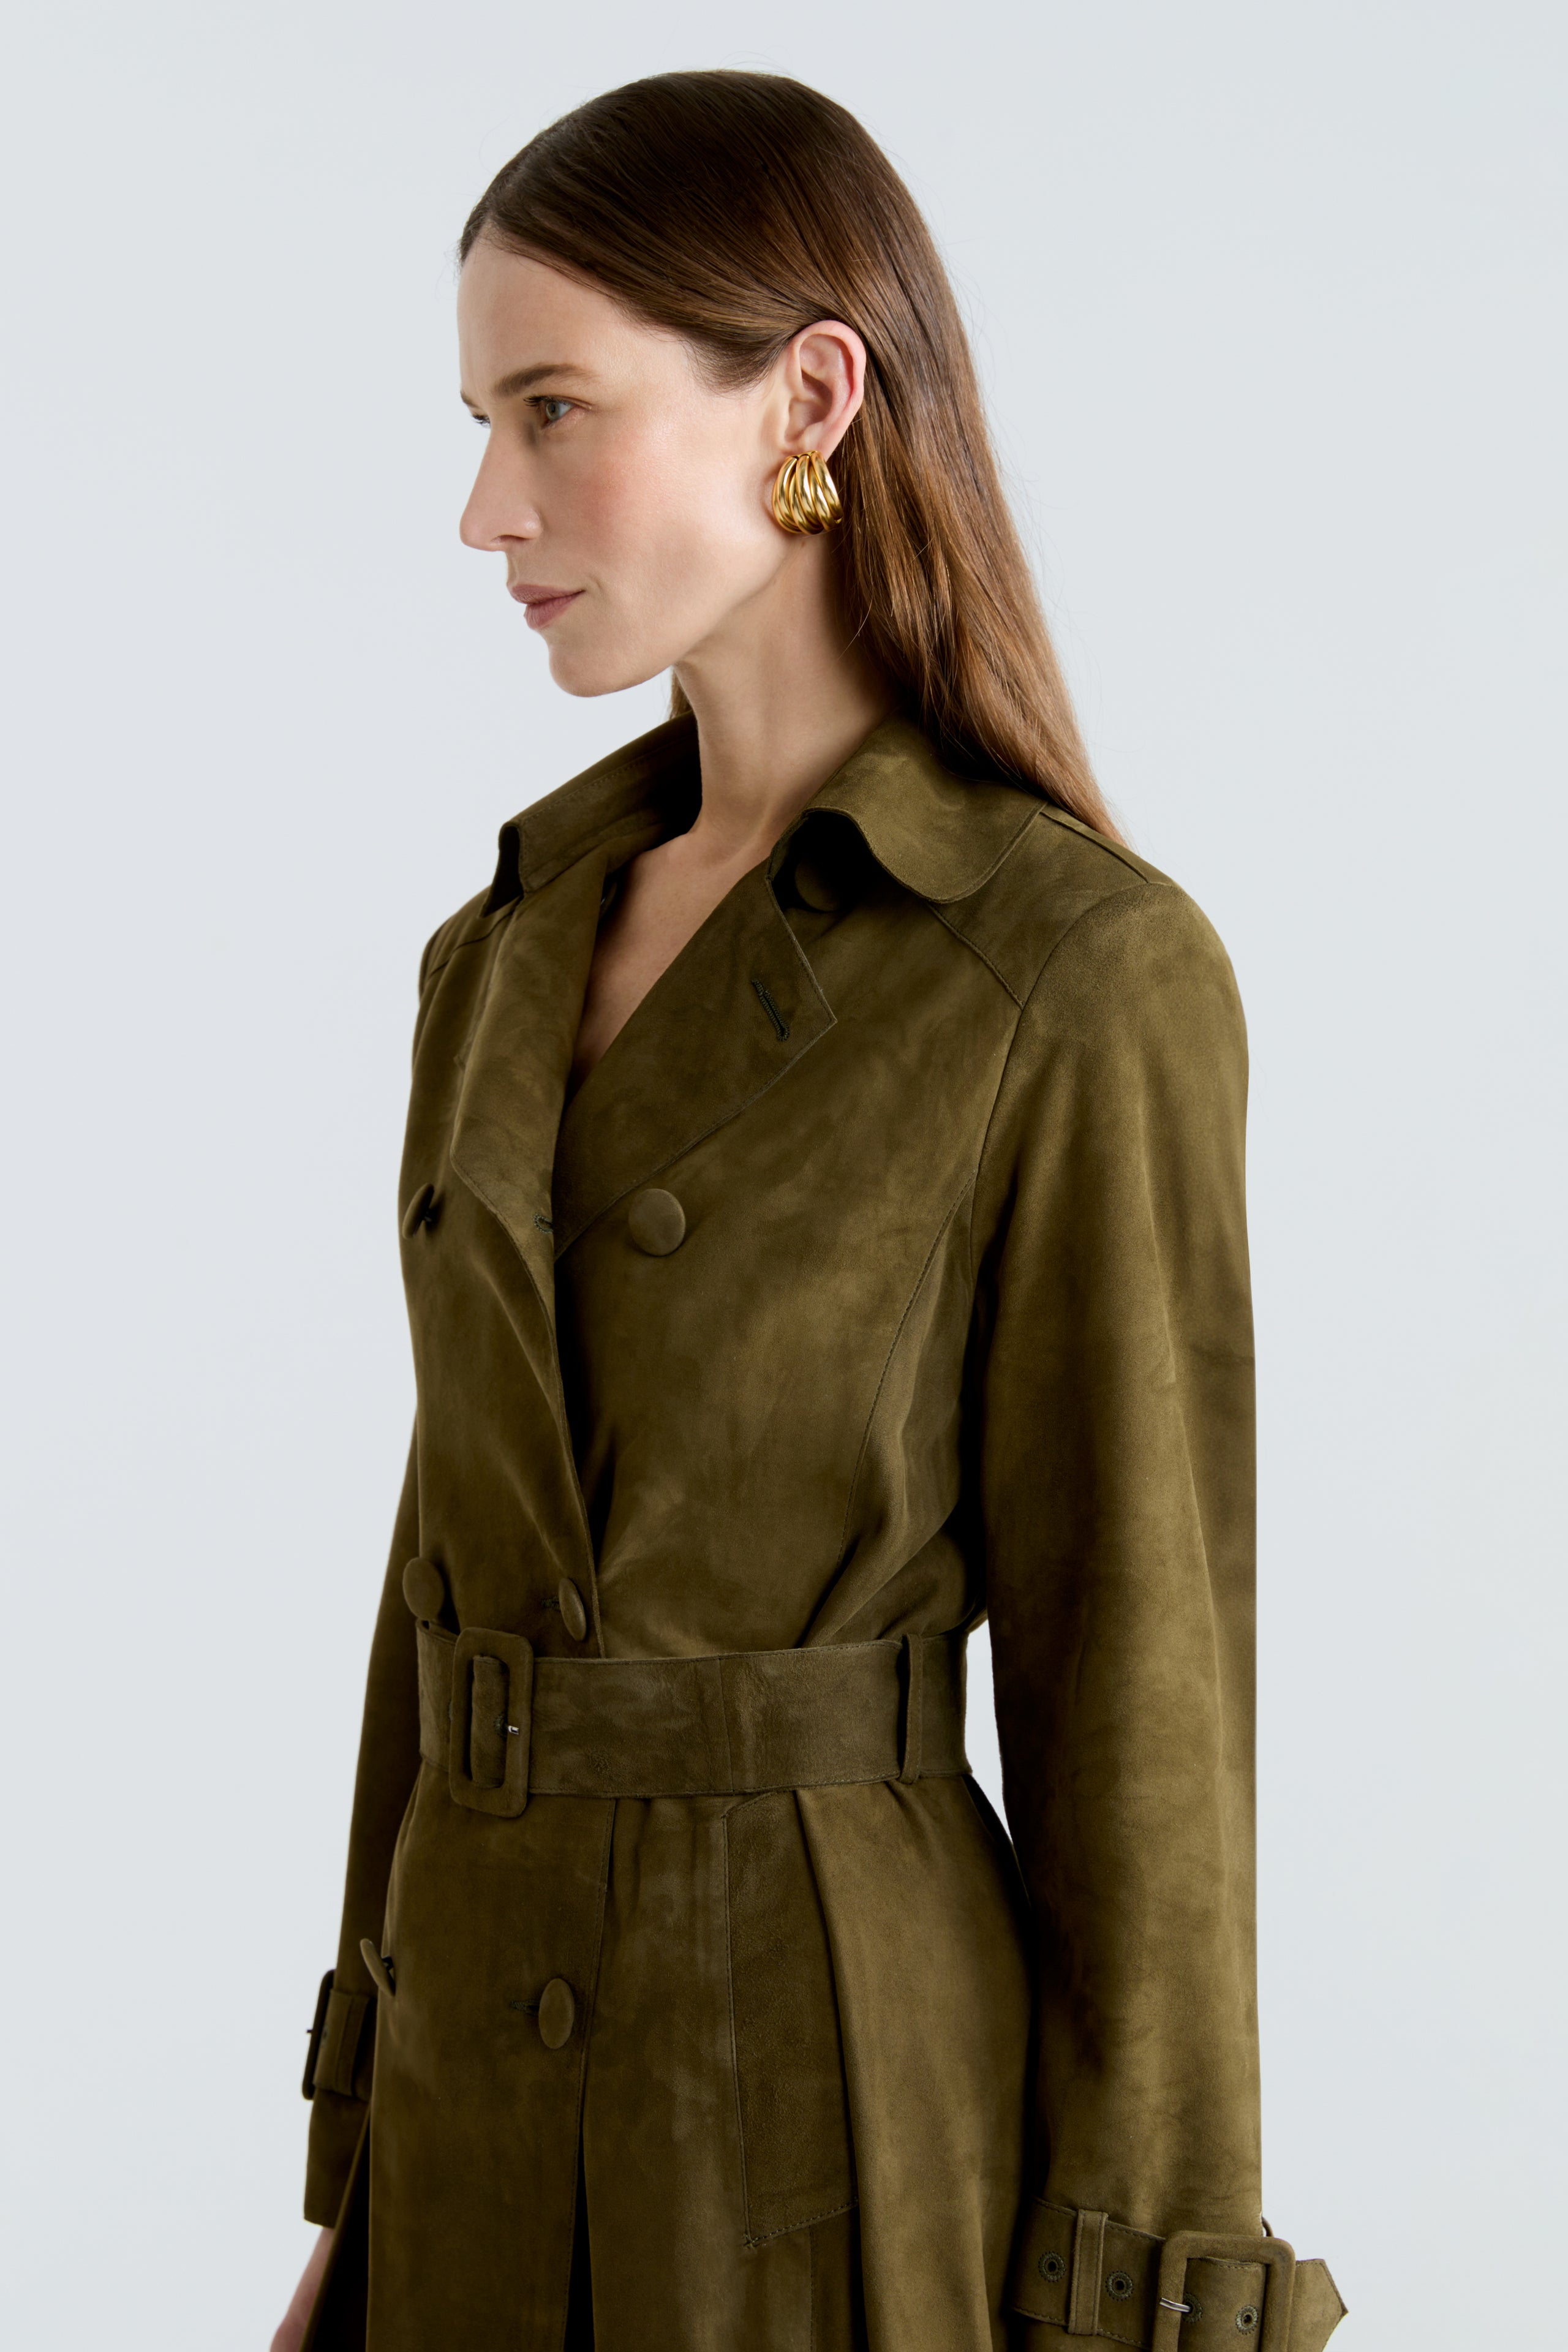 Model is wearing the Tate Olive Everyday Suede Trench Coat Close Up